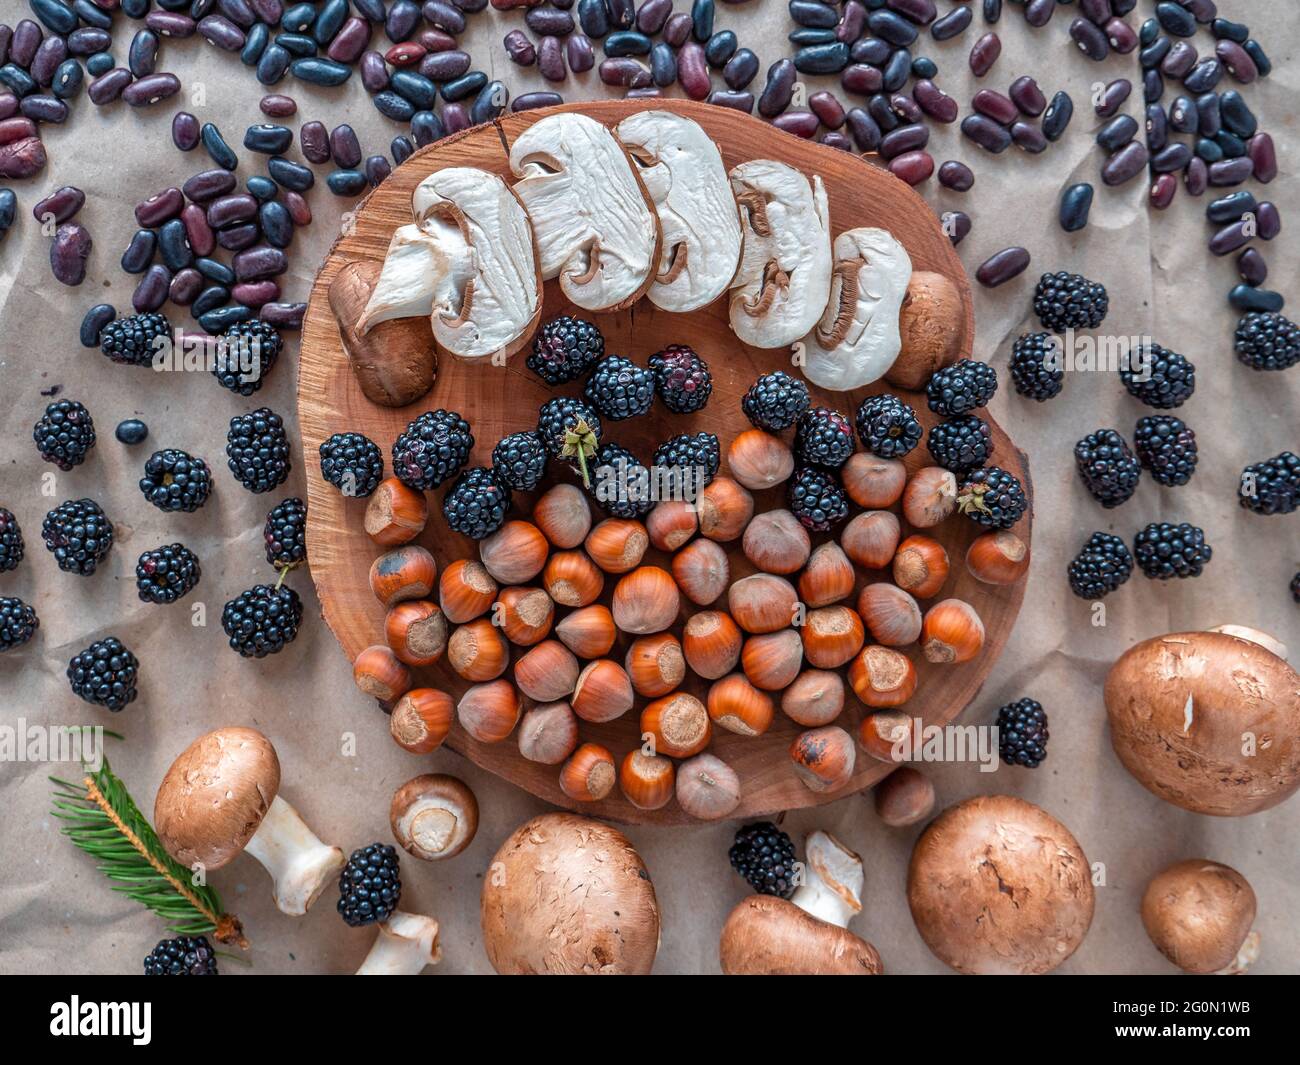 Healthy autumn food selection: white sliced mushrooms, shelled hazelnuts, purple kidney beans, blackberries, and tiny fir branch on a slice of wood. Stock Photo